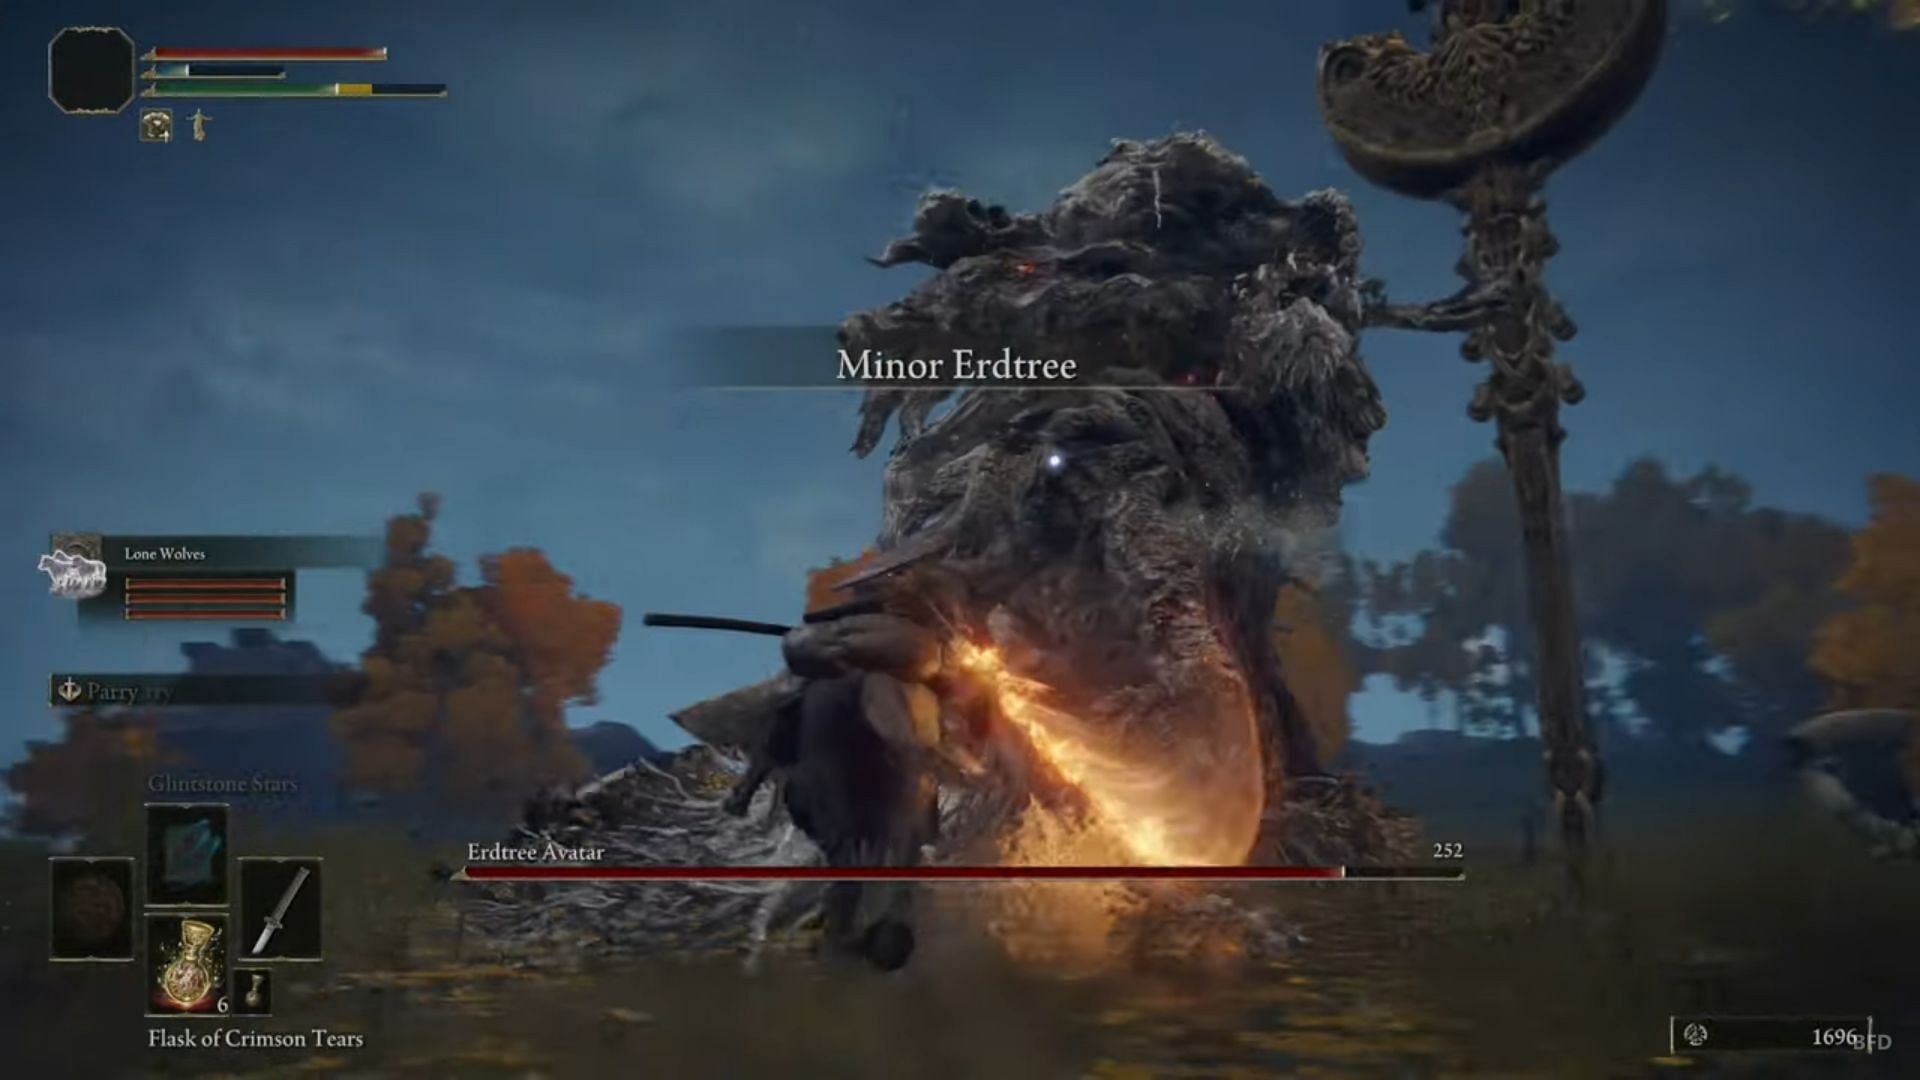 Erdtree Avatar in Elden Ring might look easy, but its attacks can often be a bit hard to dodge (Image via Boss Fight Database/YouTube)